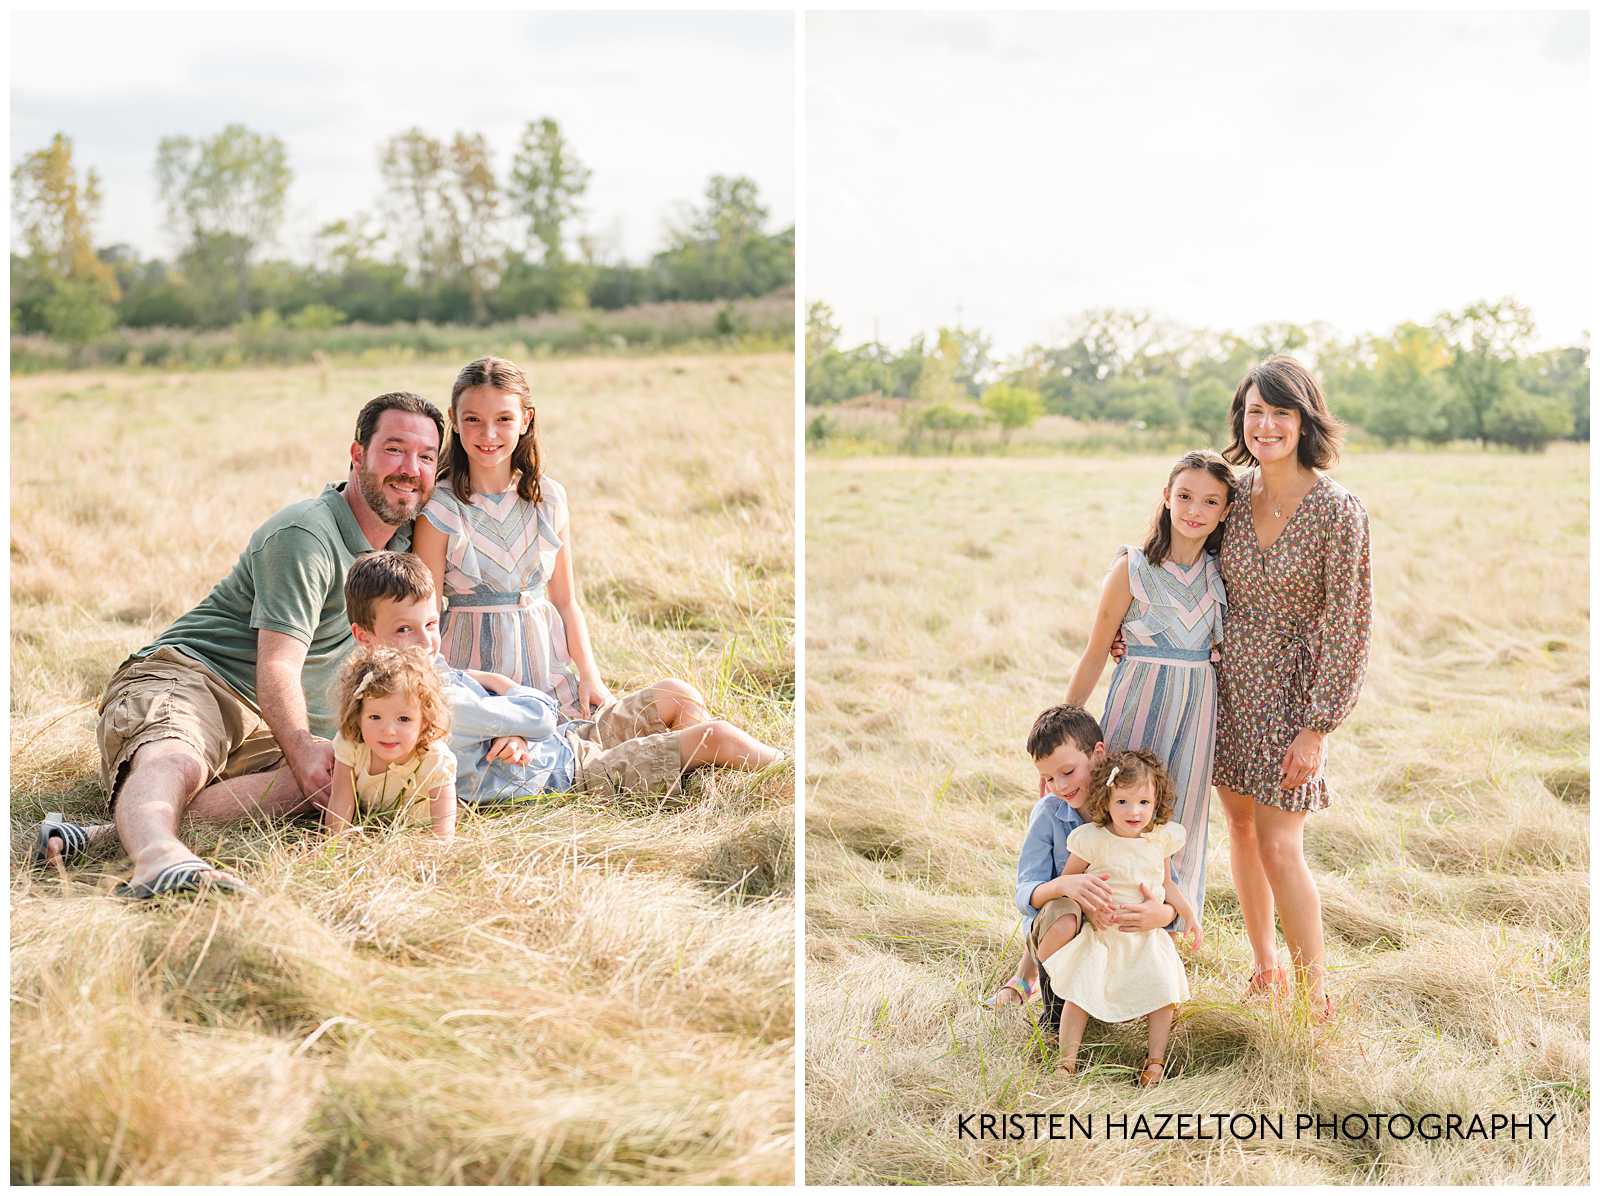 Mom and Dad with three kids standing in a grassy field